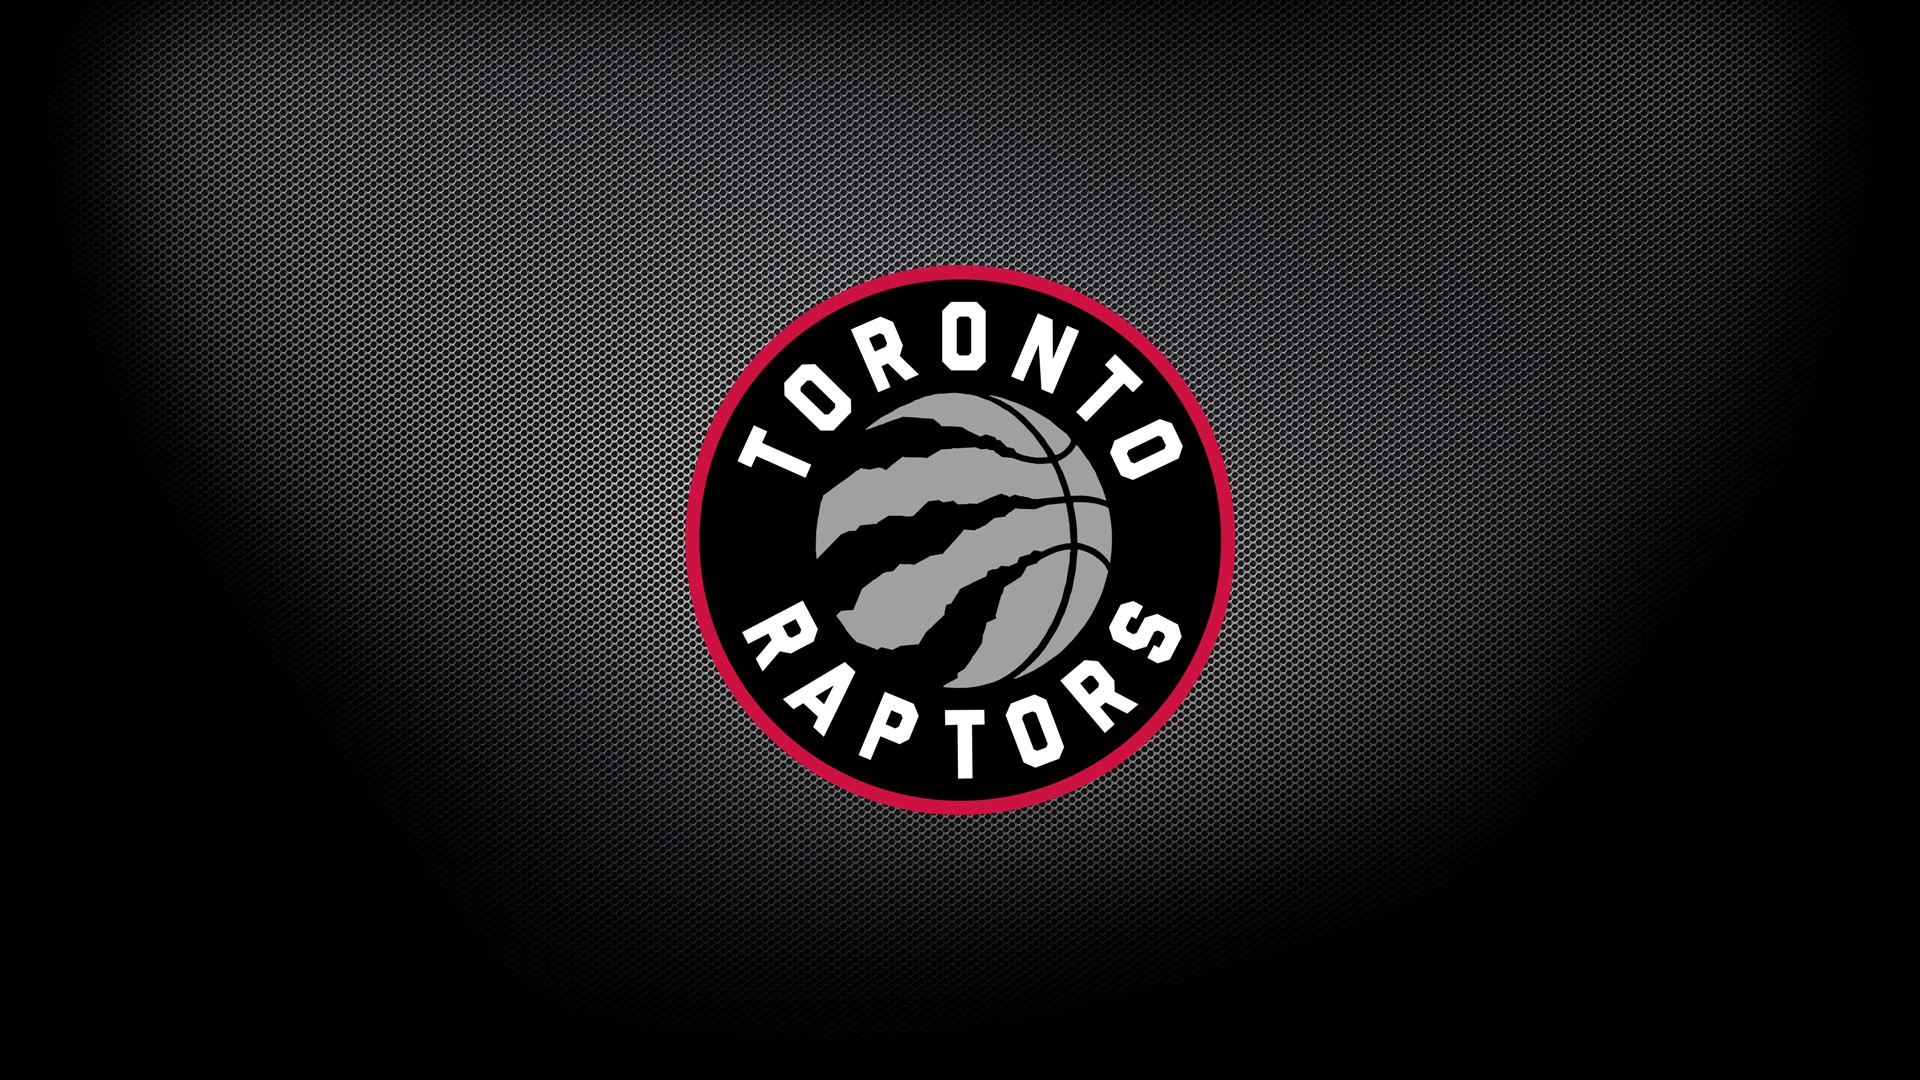 Toronto Raptors Logo Desktop Wallpapers with high-resolution 1920x1080 pixel. You can use this wallpaper for your Desktop Computer Backgrounds, Windows or Mac Screensavers, iPhone Lock screen, Tablet or Android and another Mobile Phone device